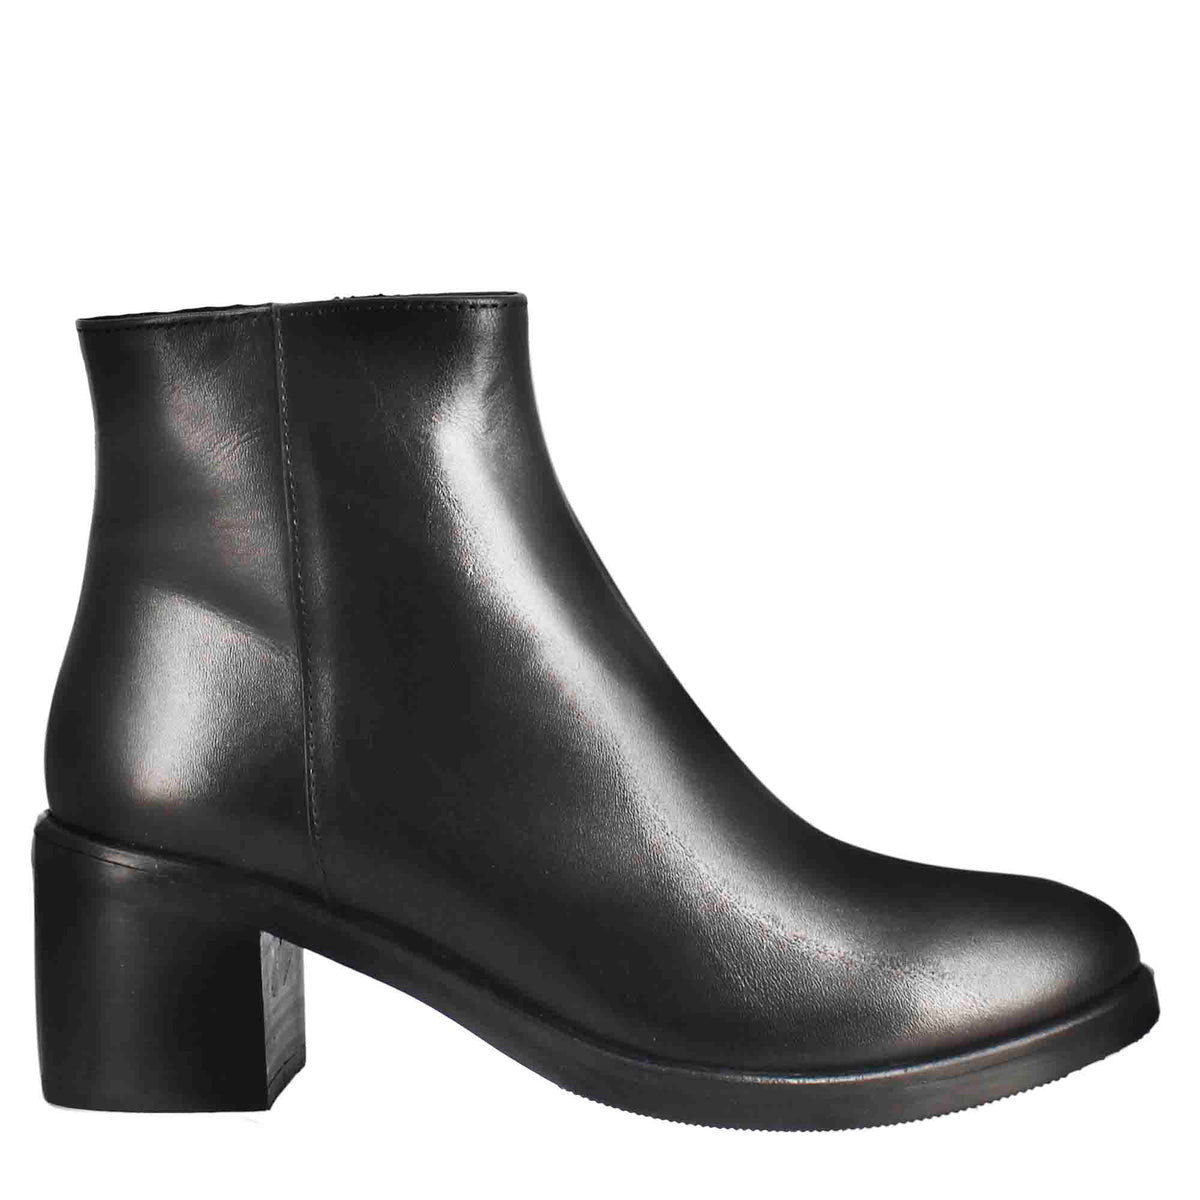 Women's smooth ankle boot with medium heel in black color leather